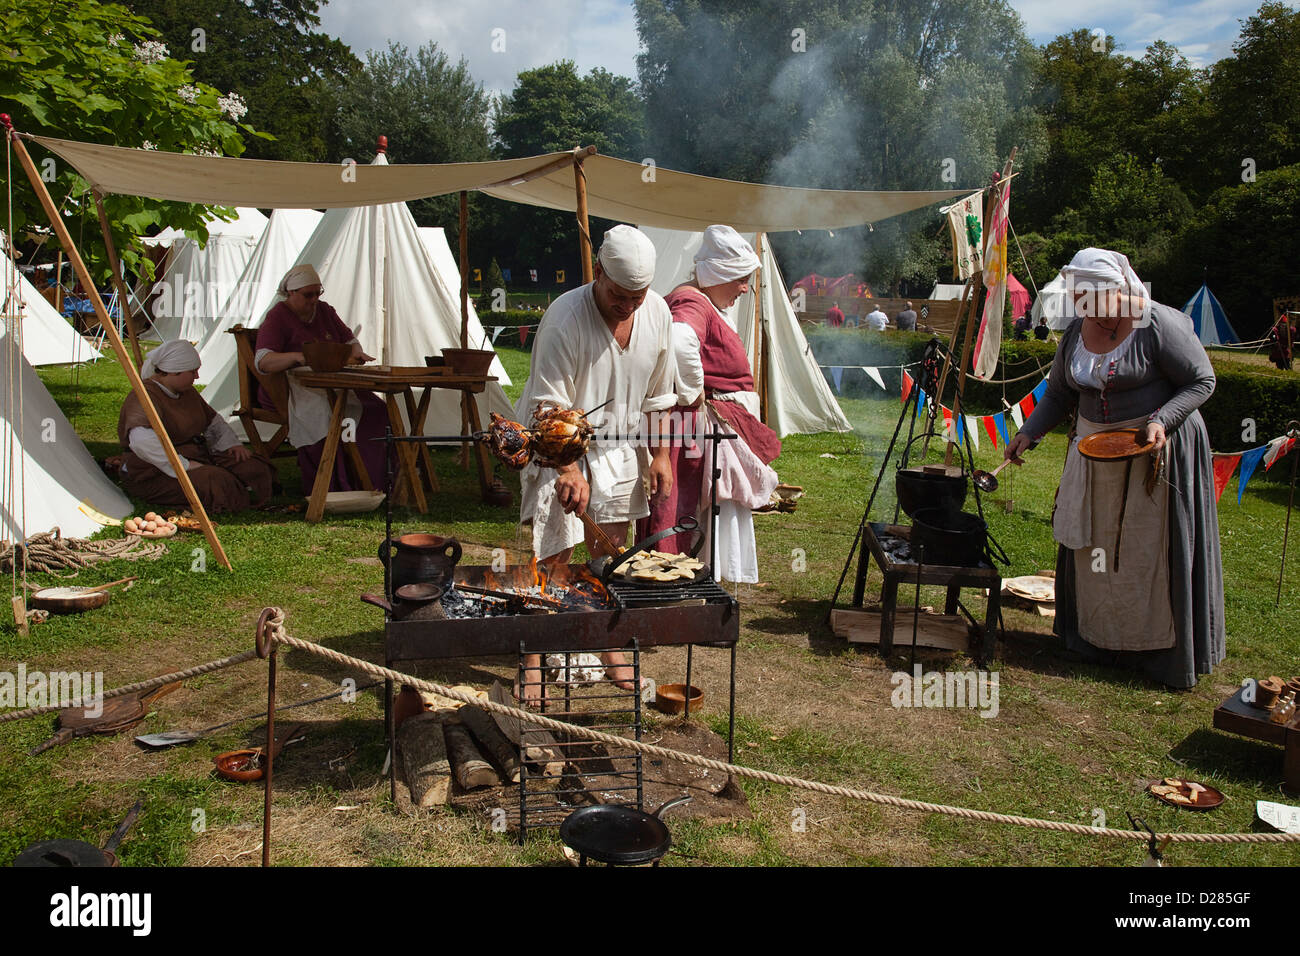 England, West Sussex, Arundel, Jousting festival in the grounds of Arundel Castle. Stock Photo